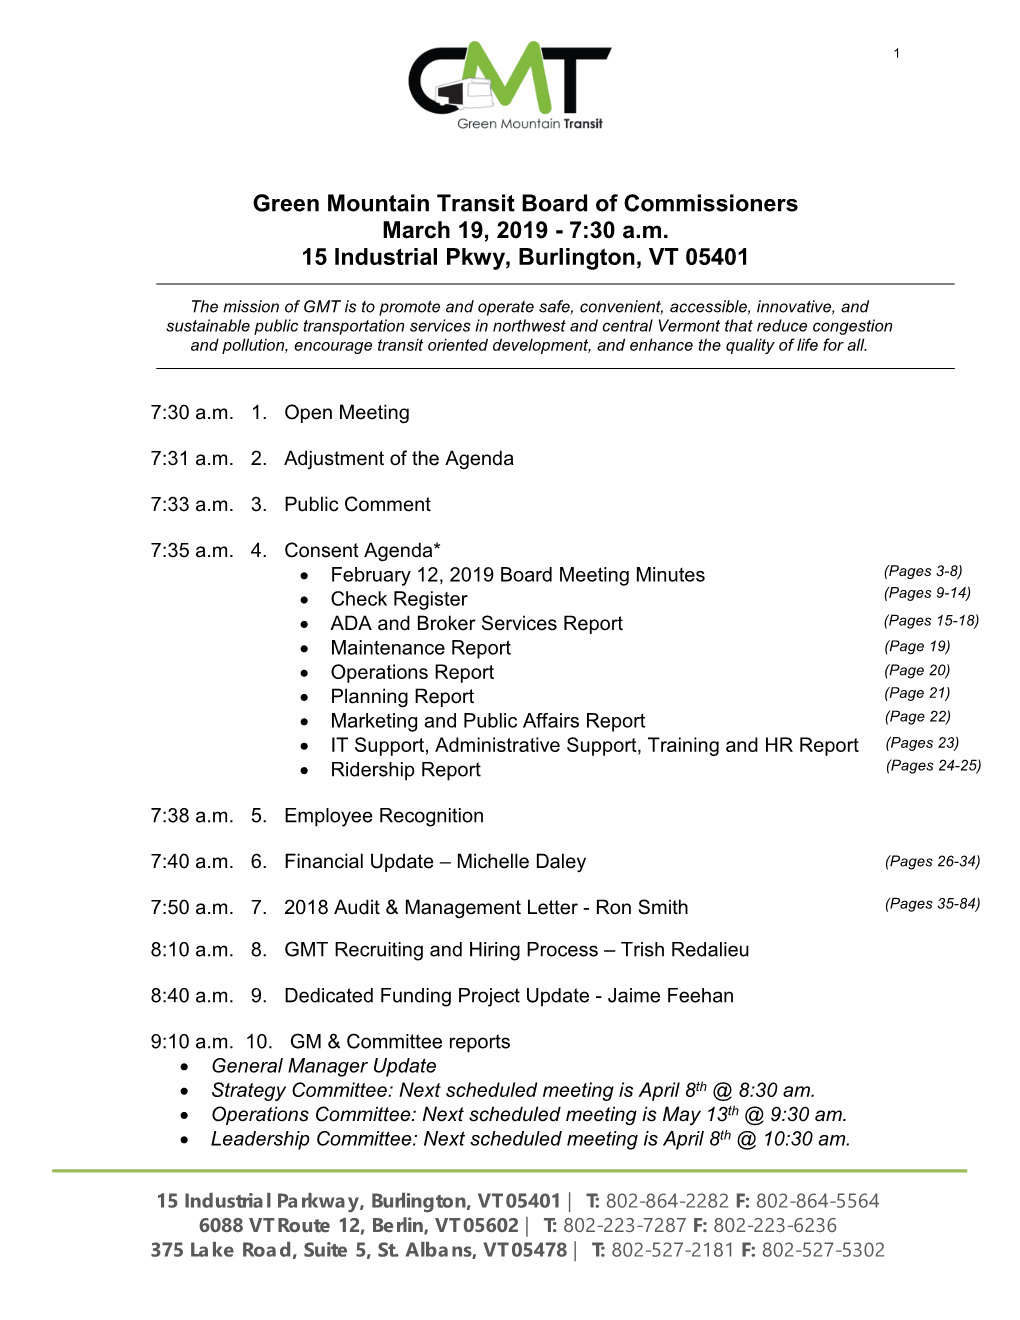 Green Mountain Transit Board of Commissioners March 19, 2019 - 7:30 A.M